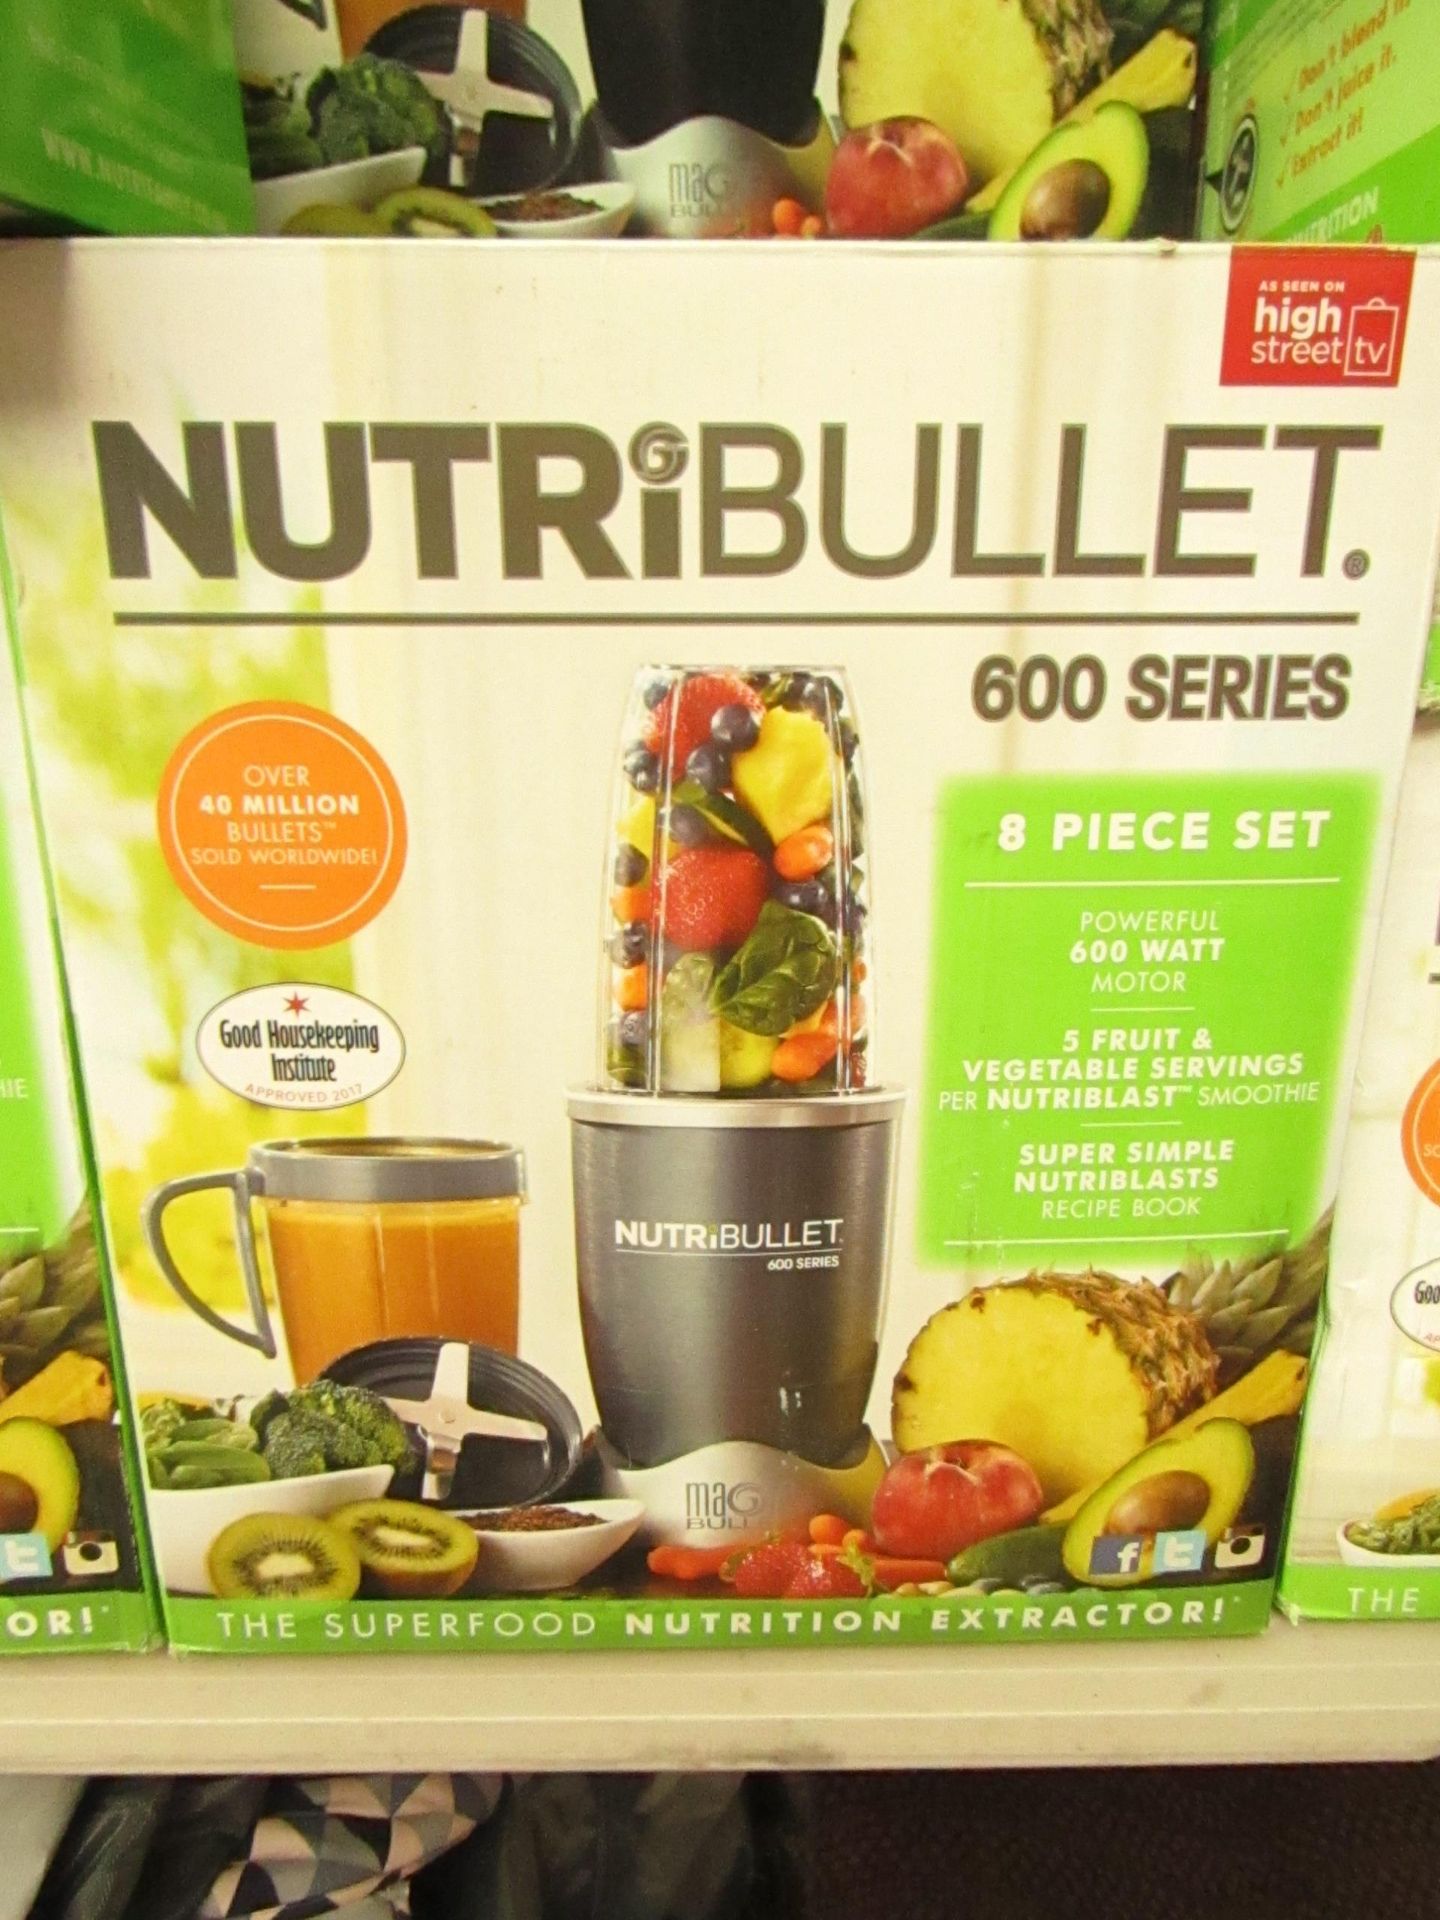 | 1x | NUTRIBULLET 600 SERIES | UNCHECKED AND BOXED | NO ONLINE RE-SALE | SKU C5060191467346 |